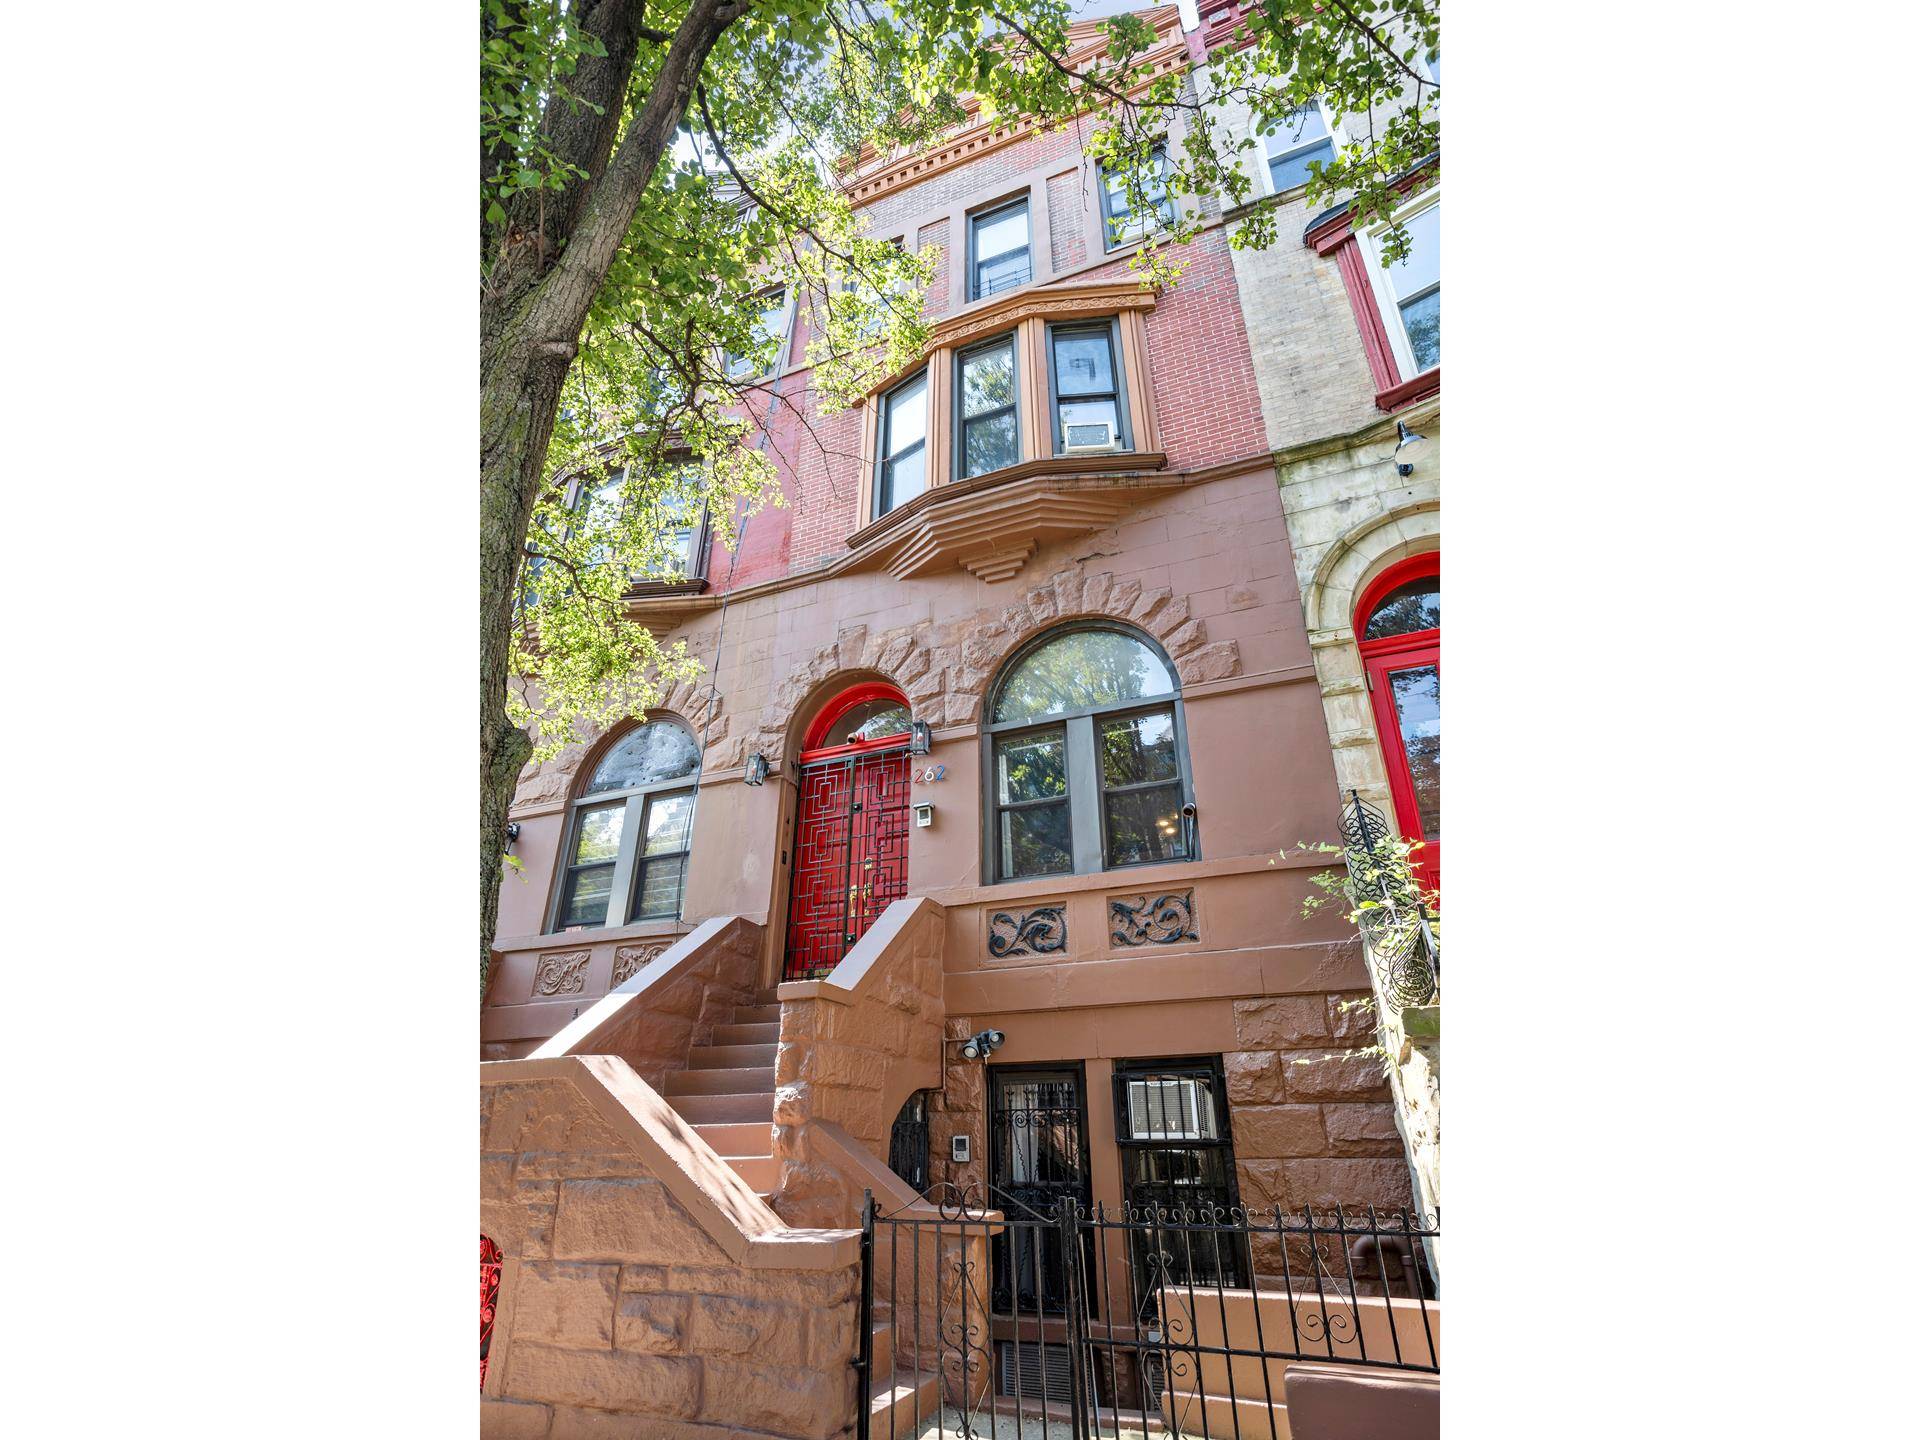 Offered is a well maintained, 18 foot wide, 2 family brownstone not an SRO as 2 Class A units per HPD website located on one of Central Harlem's prettiest tree ...